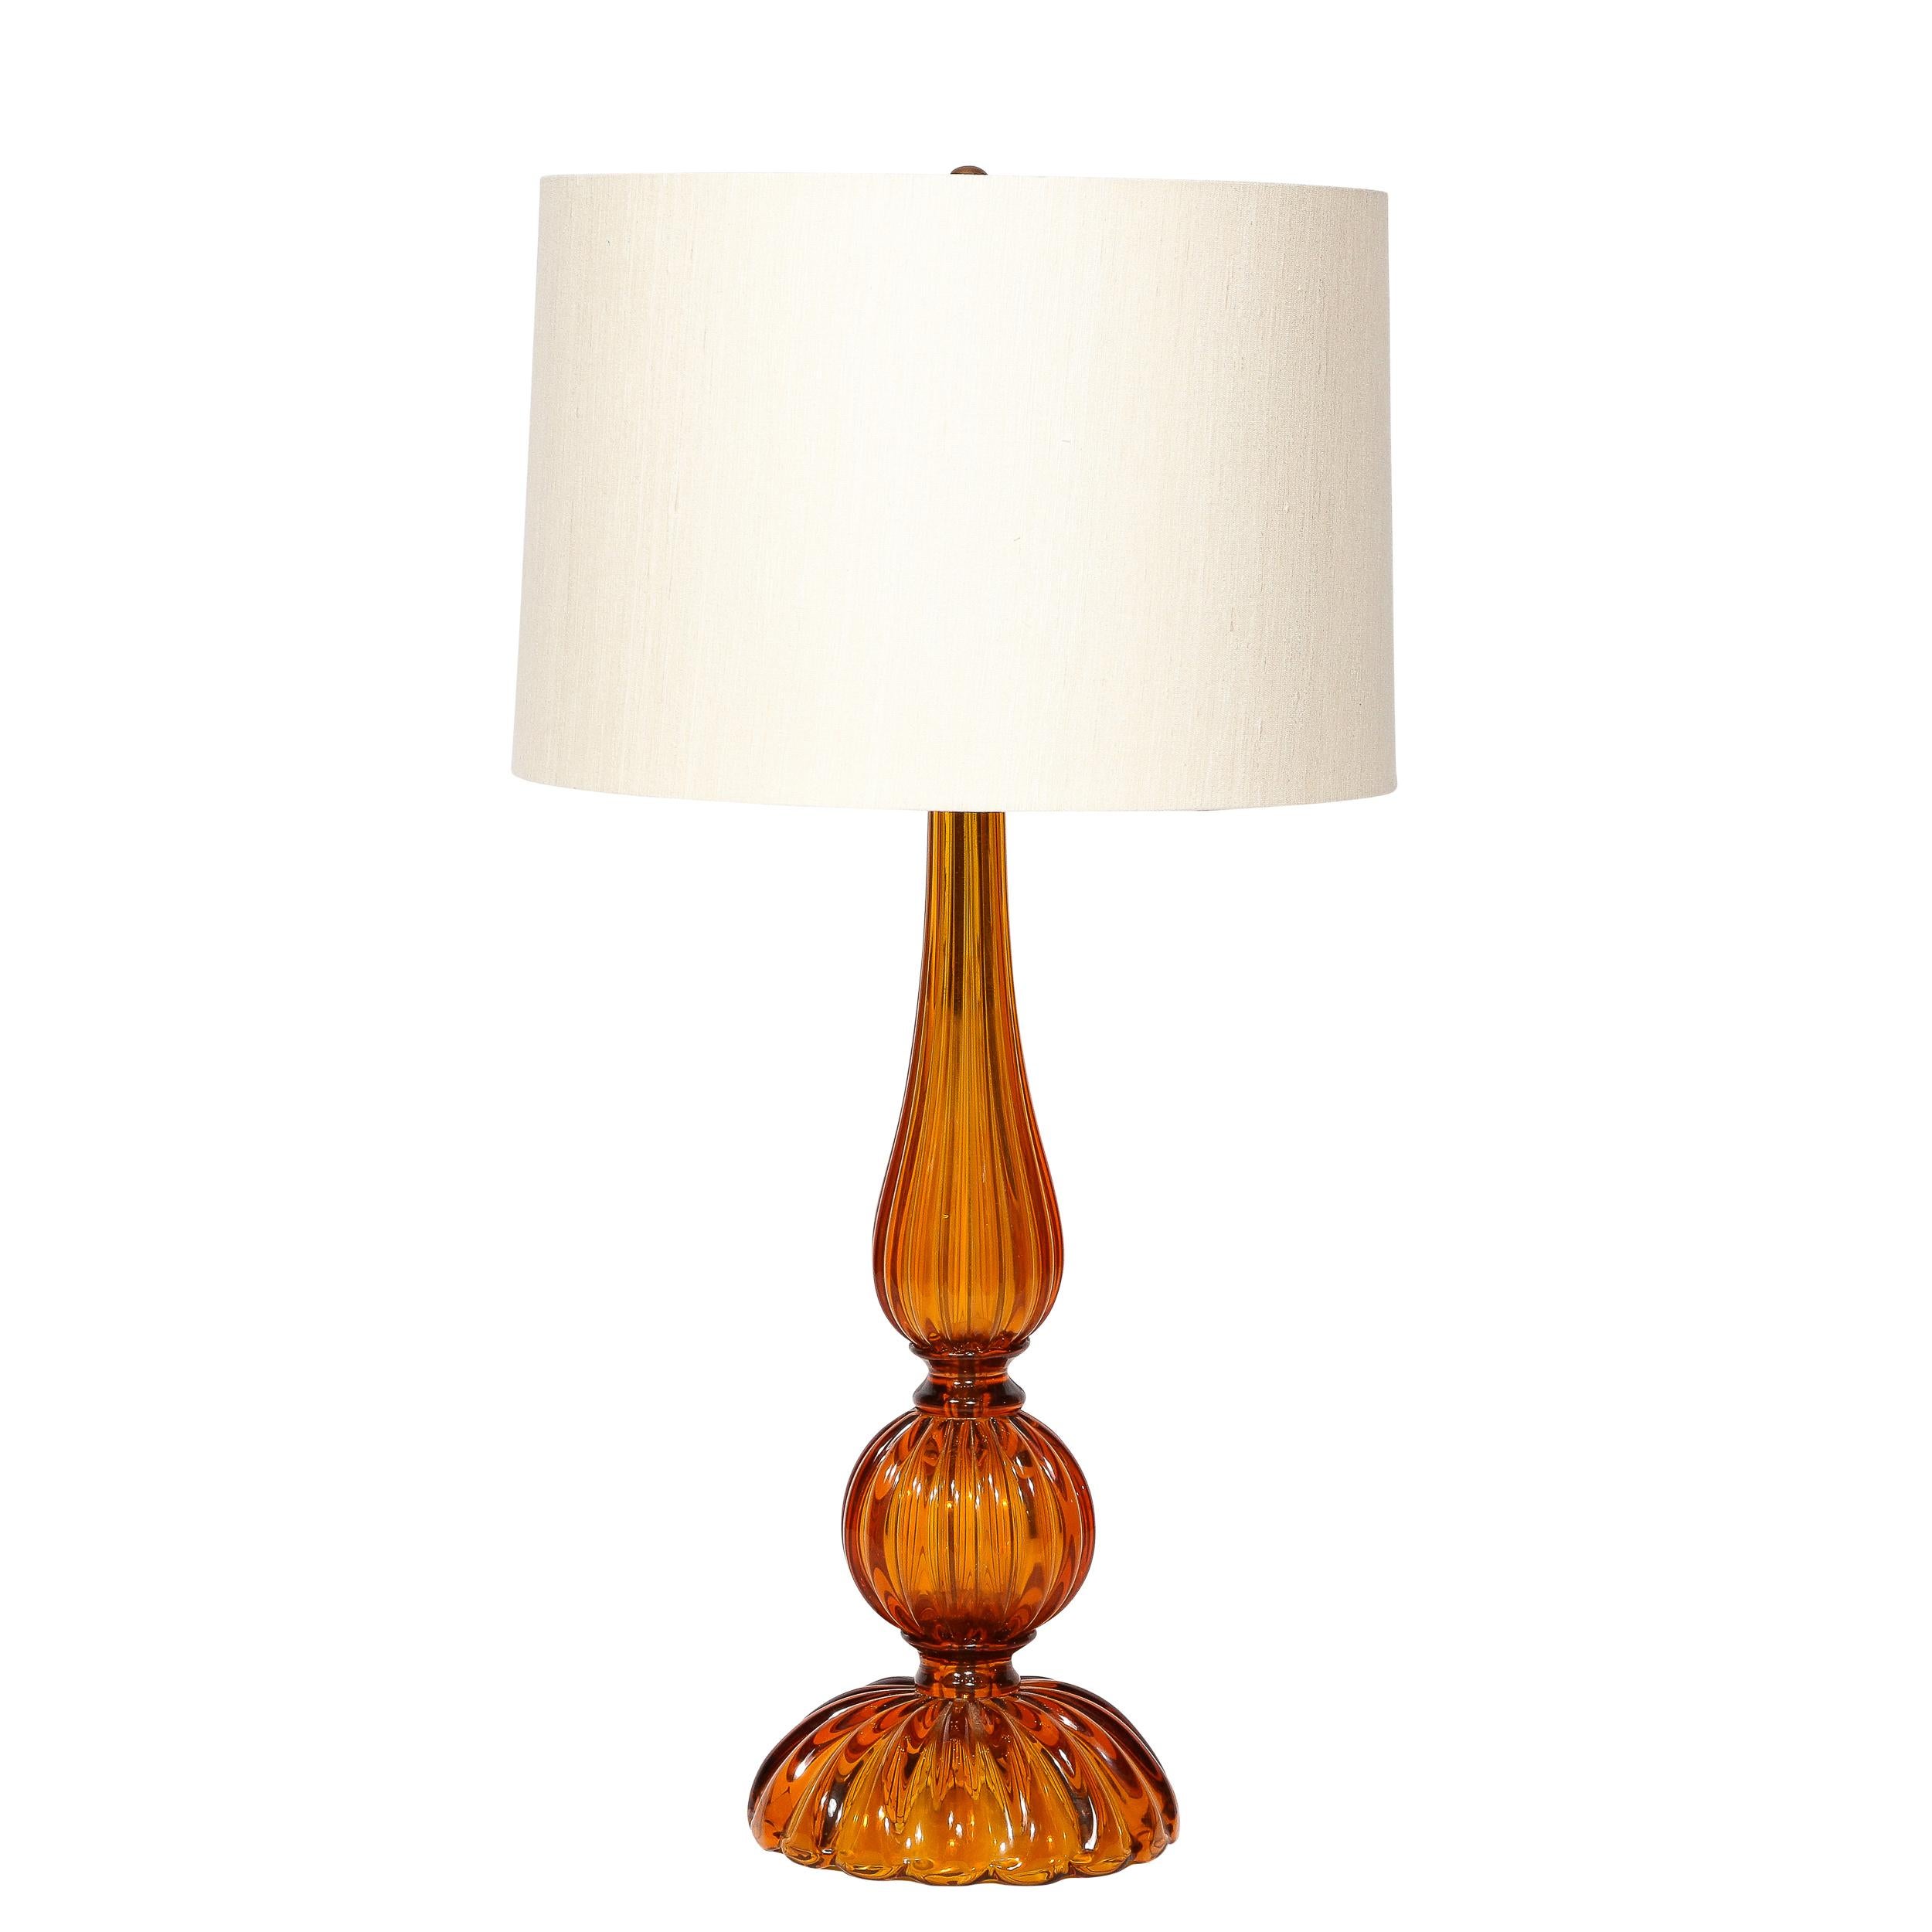 This beautiful pair of modernist table lamps were hand blown in Murano, Italy- the island off the coast of Venice renowned for centuries for its superlative glass production- during the second half of the 20th century. They feature sinuously curved,